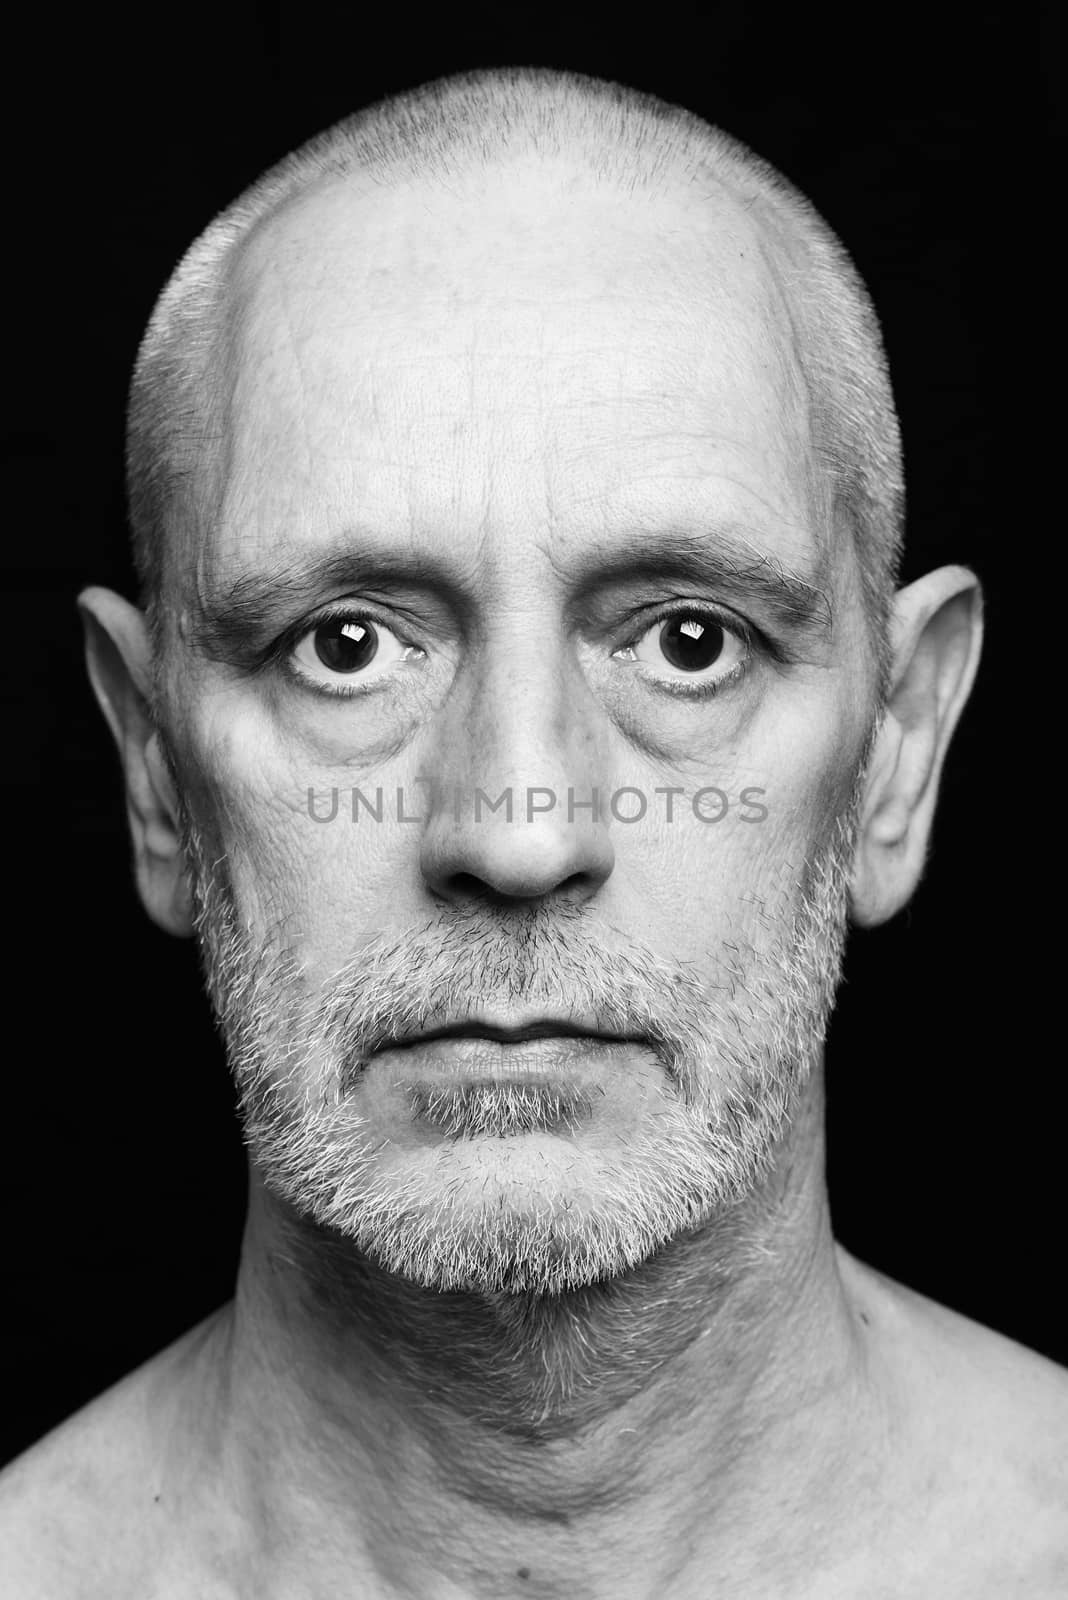 Dramatic black and white portrait of an adult man with sad expression on black background